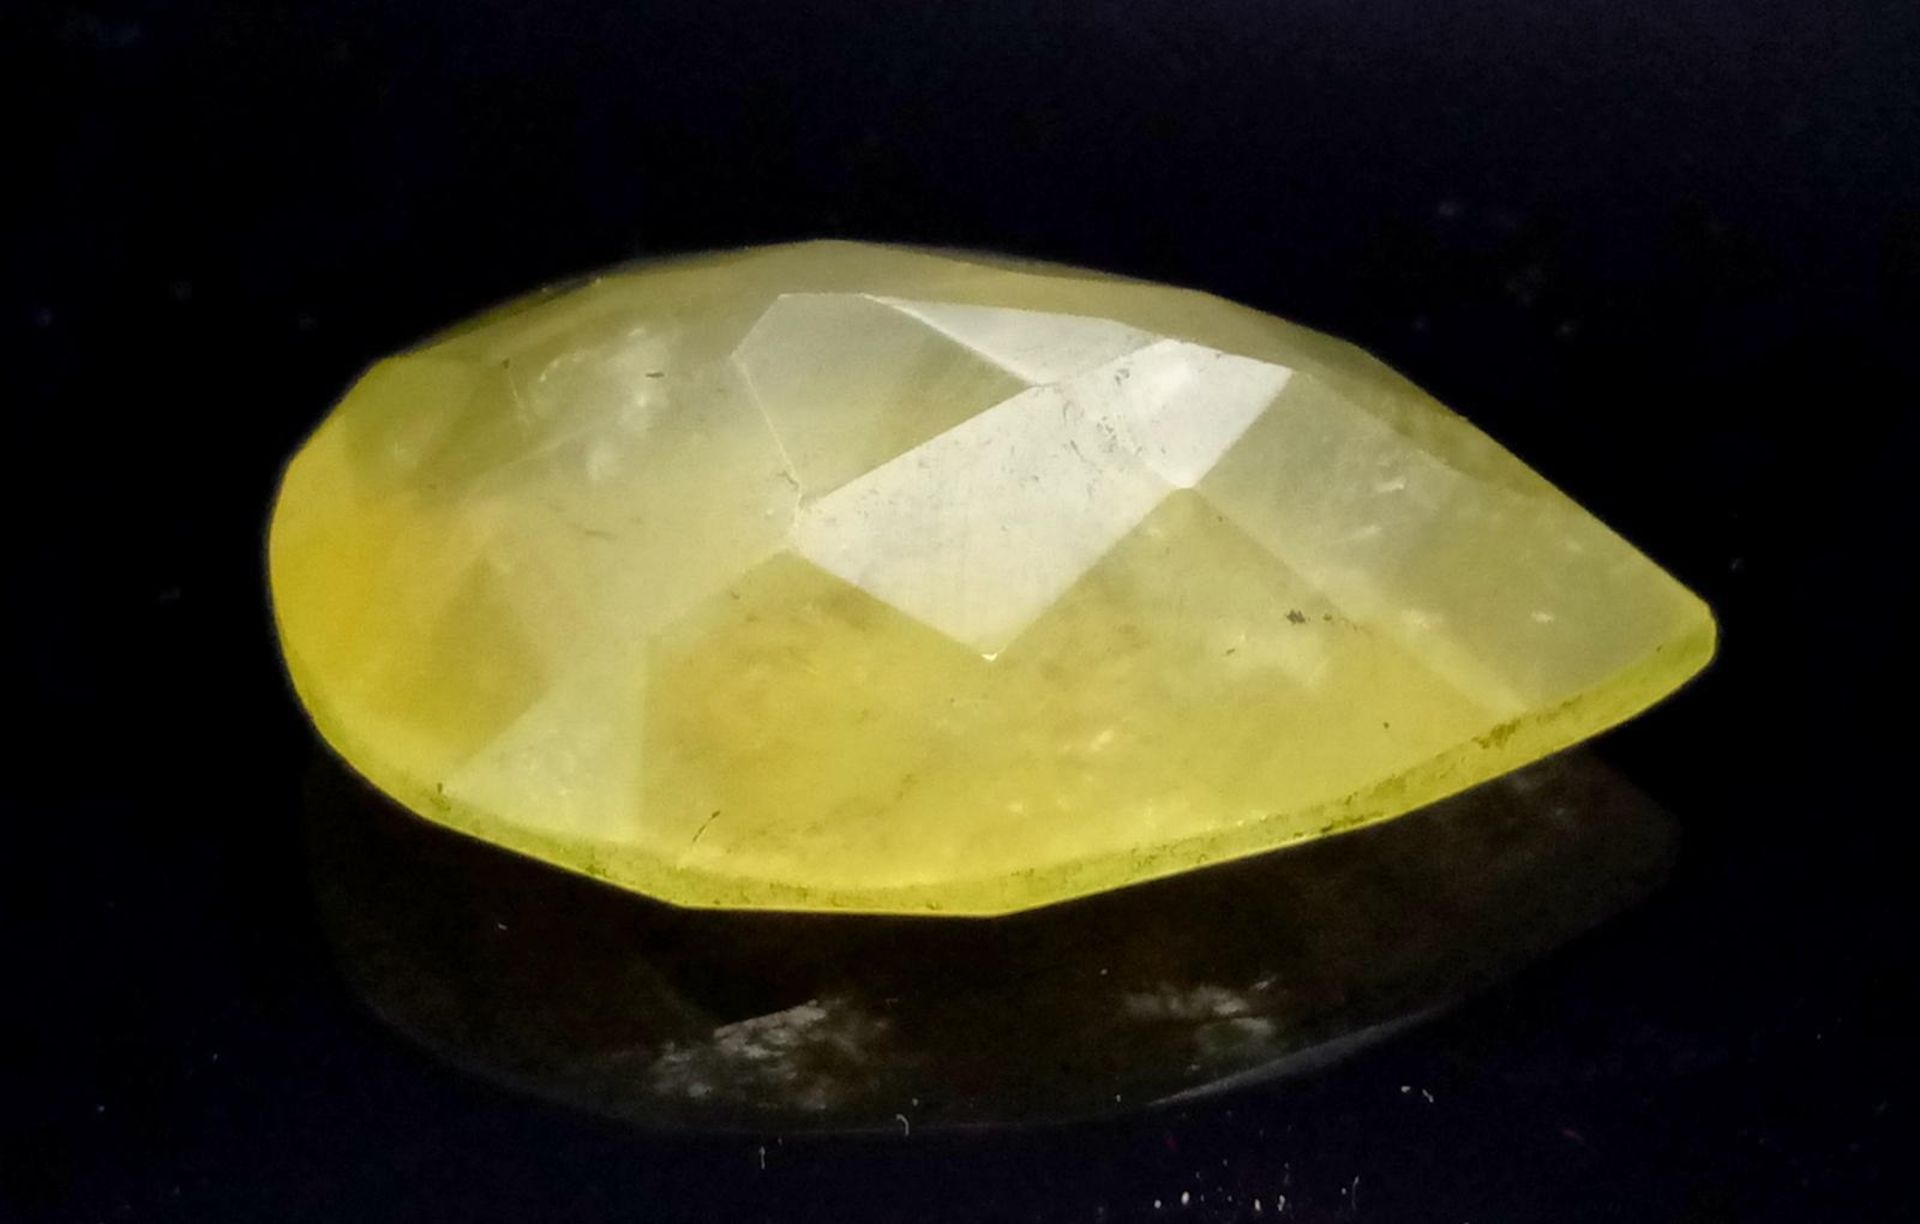 A 41.65ct Faceted Heliodor Yellow Aquamarine Pear-Shaped Gemstone. Comes with a GLI Certificate. - Image 2 of 4